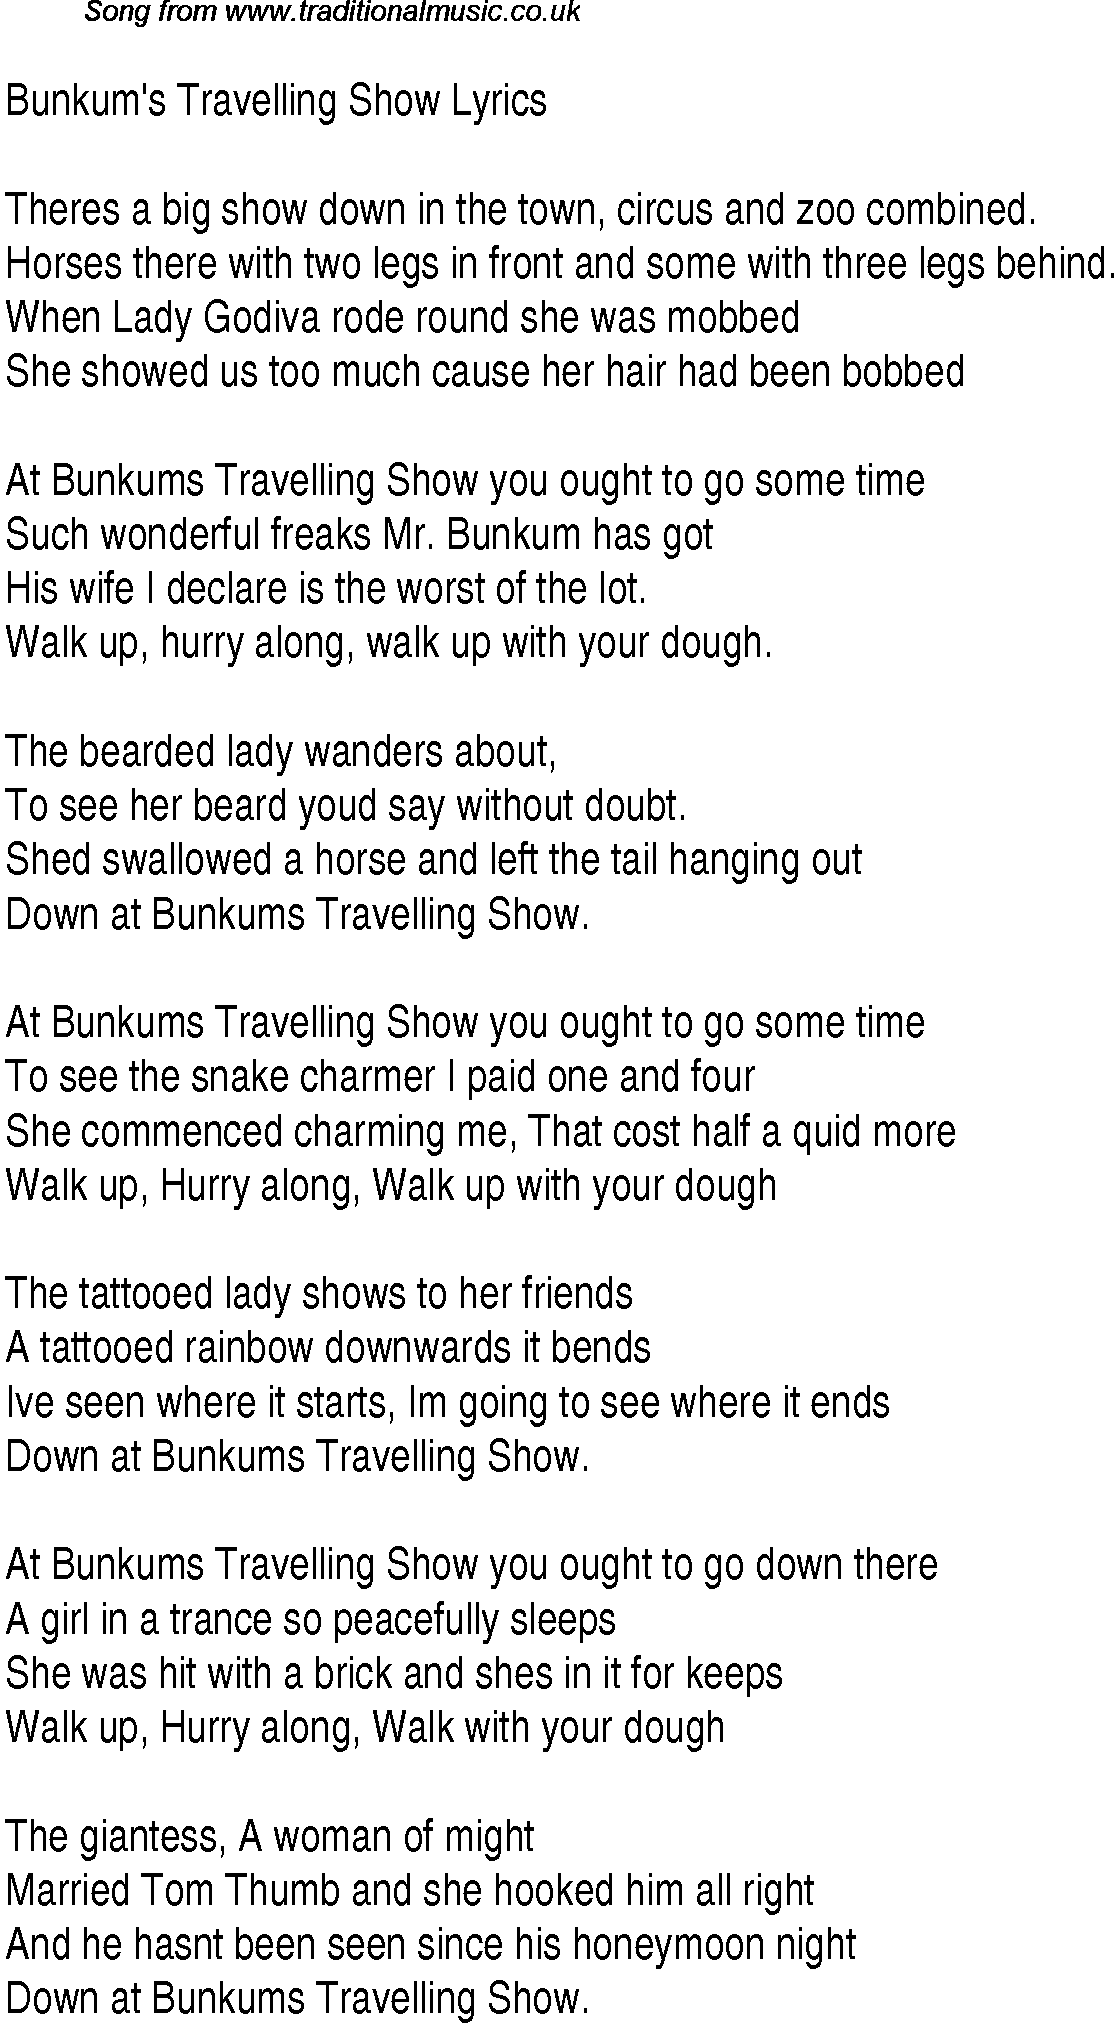 1940s top songs - lyrics for Bunkums Travelling Show(George Formby)